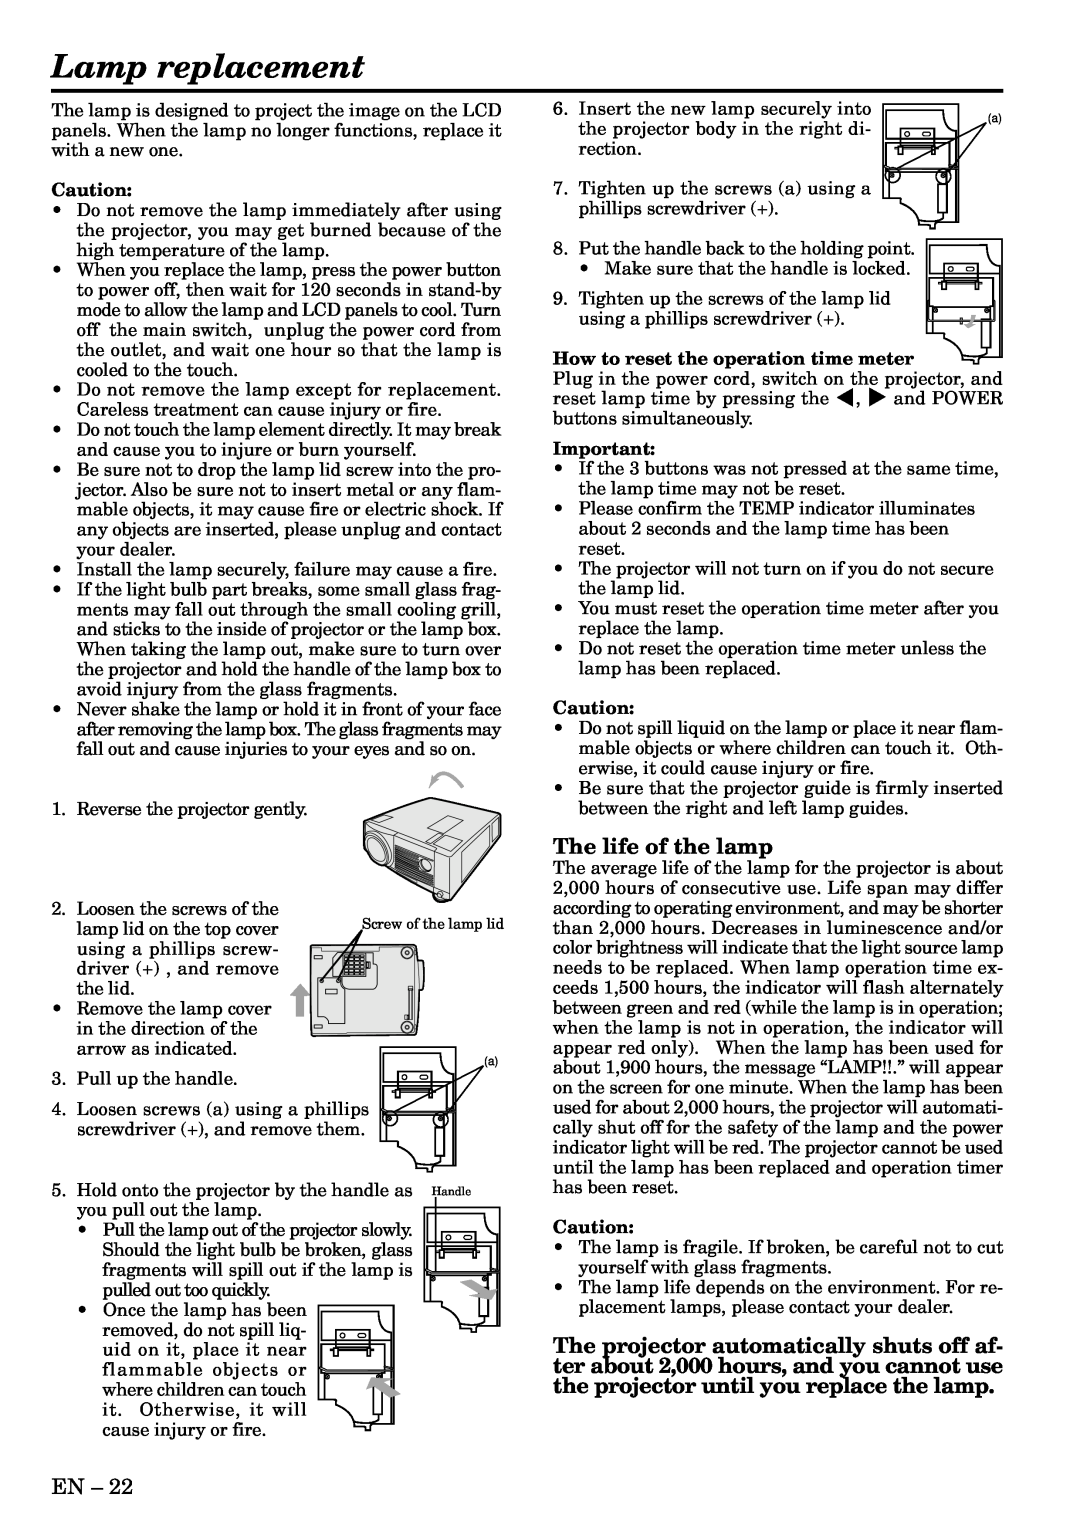 Mitsubishi Electronics S290U user manual Lamp replacement, The life of the lamp 